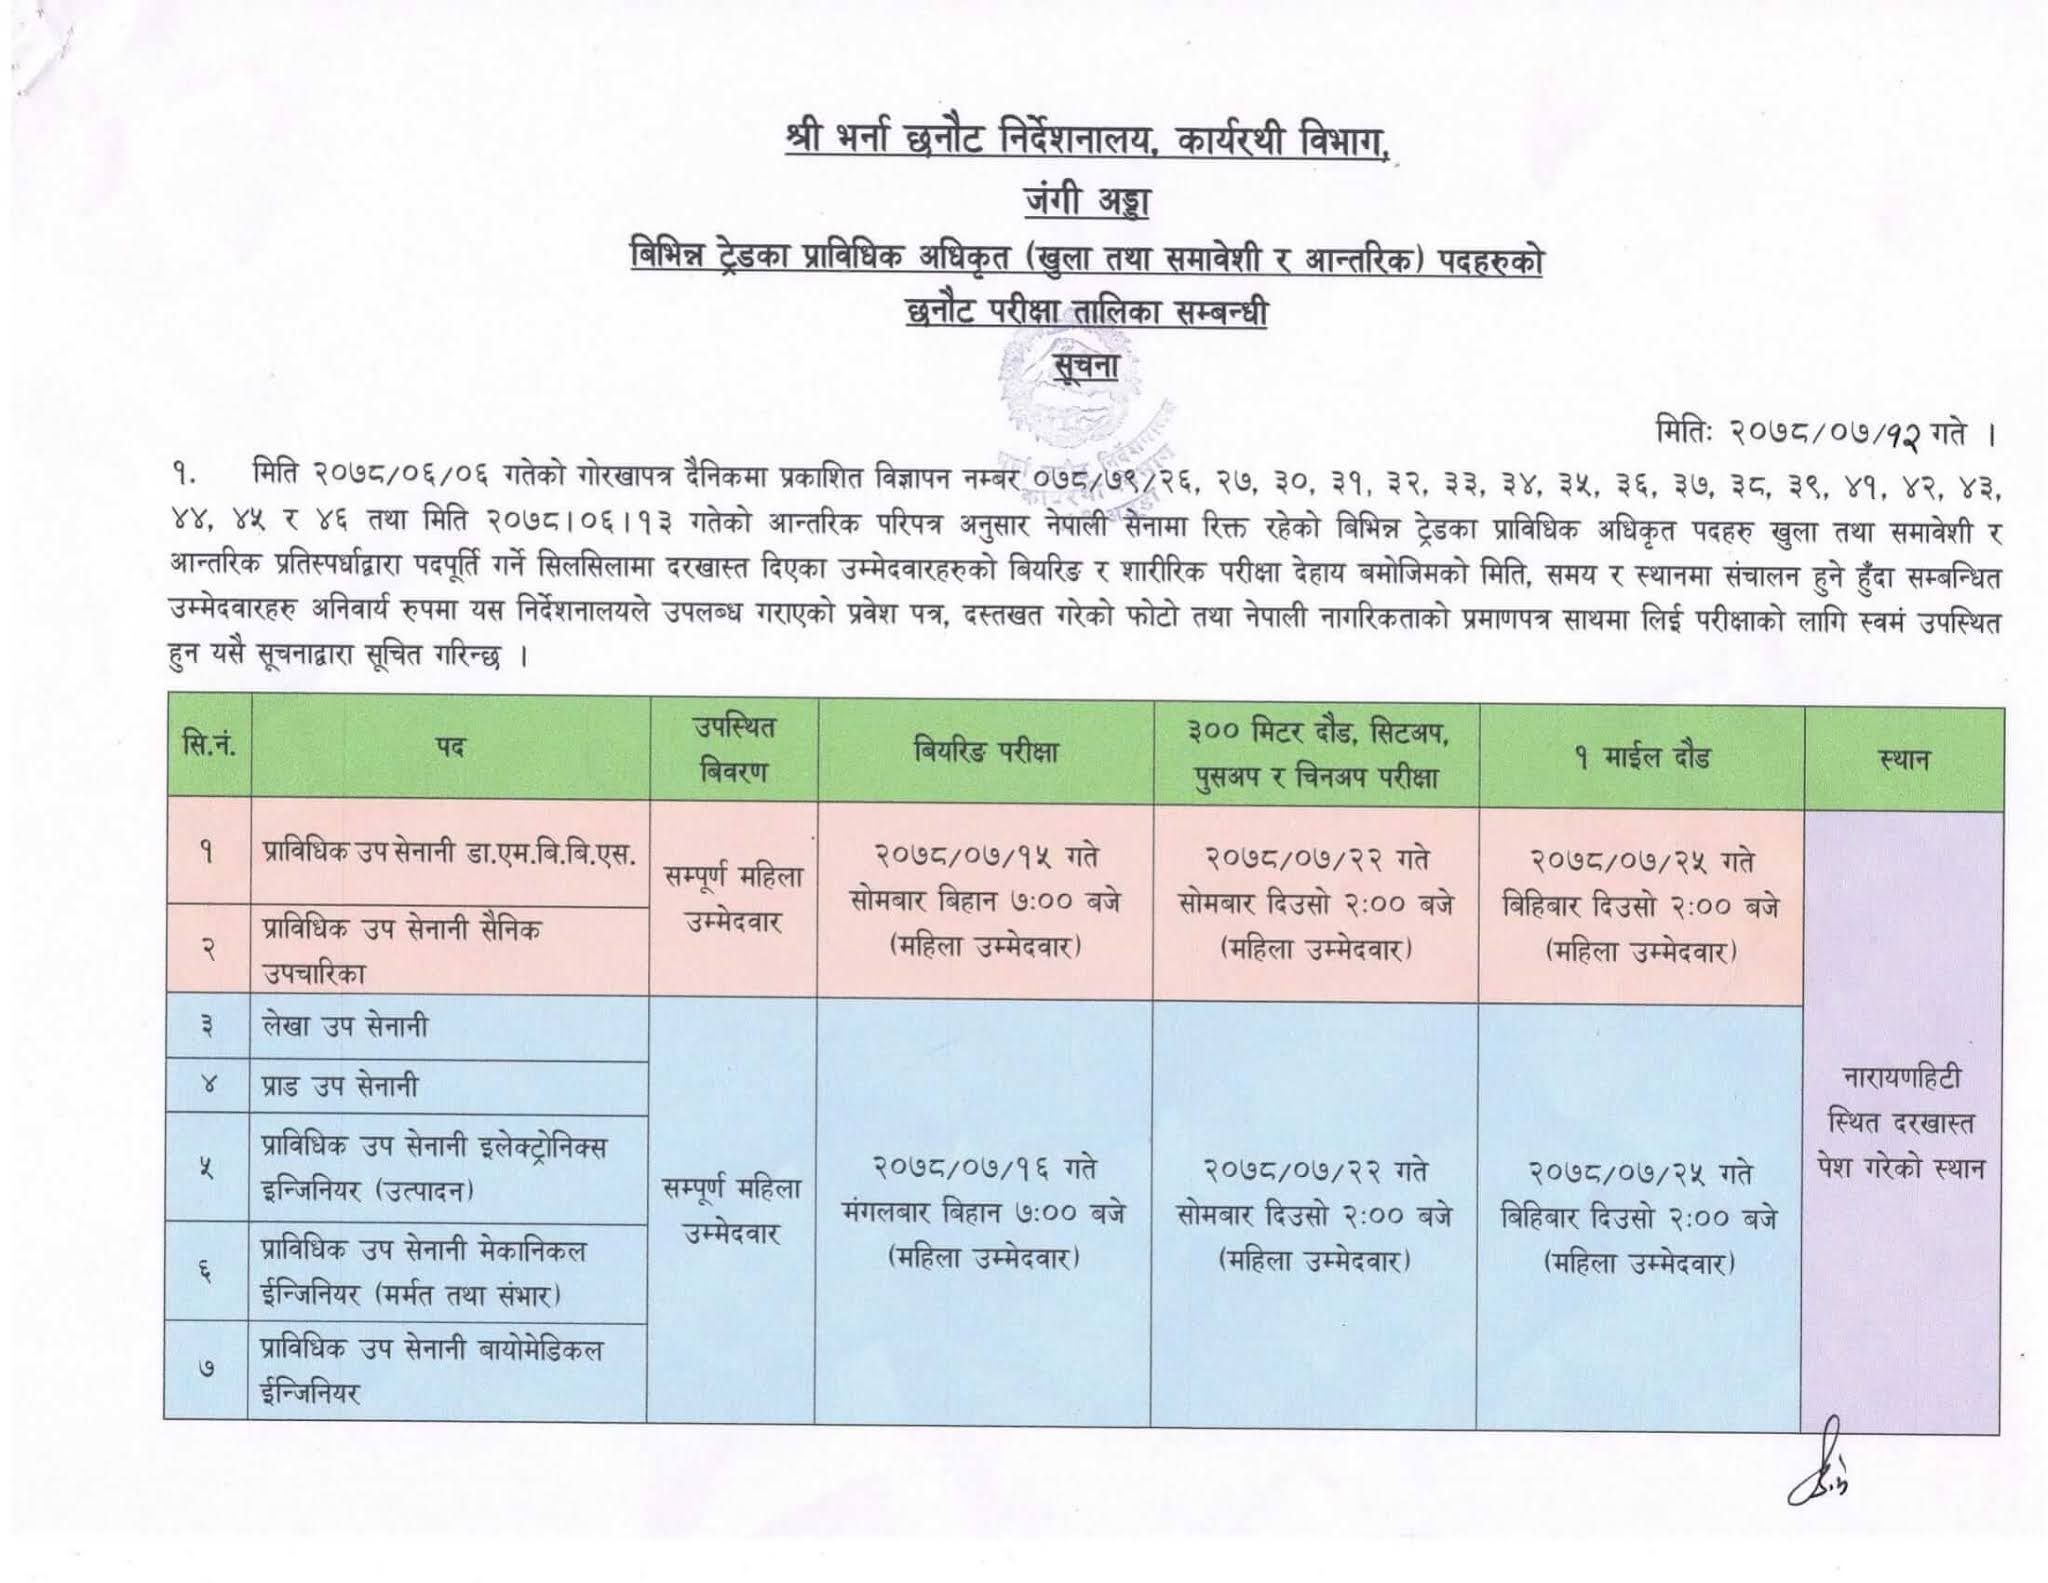 Nepal Army Lieutenant Exam Schedule for Various Fields (Technical Officer )